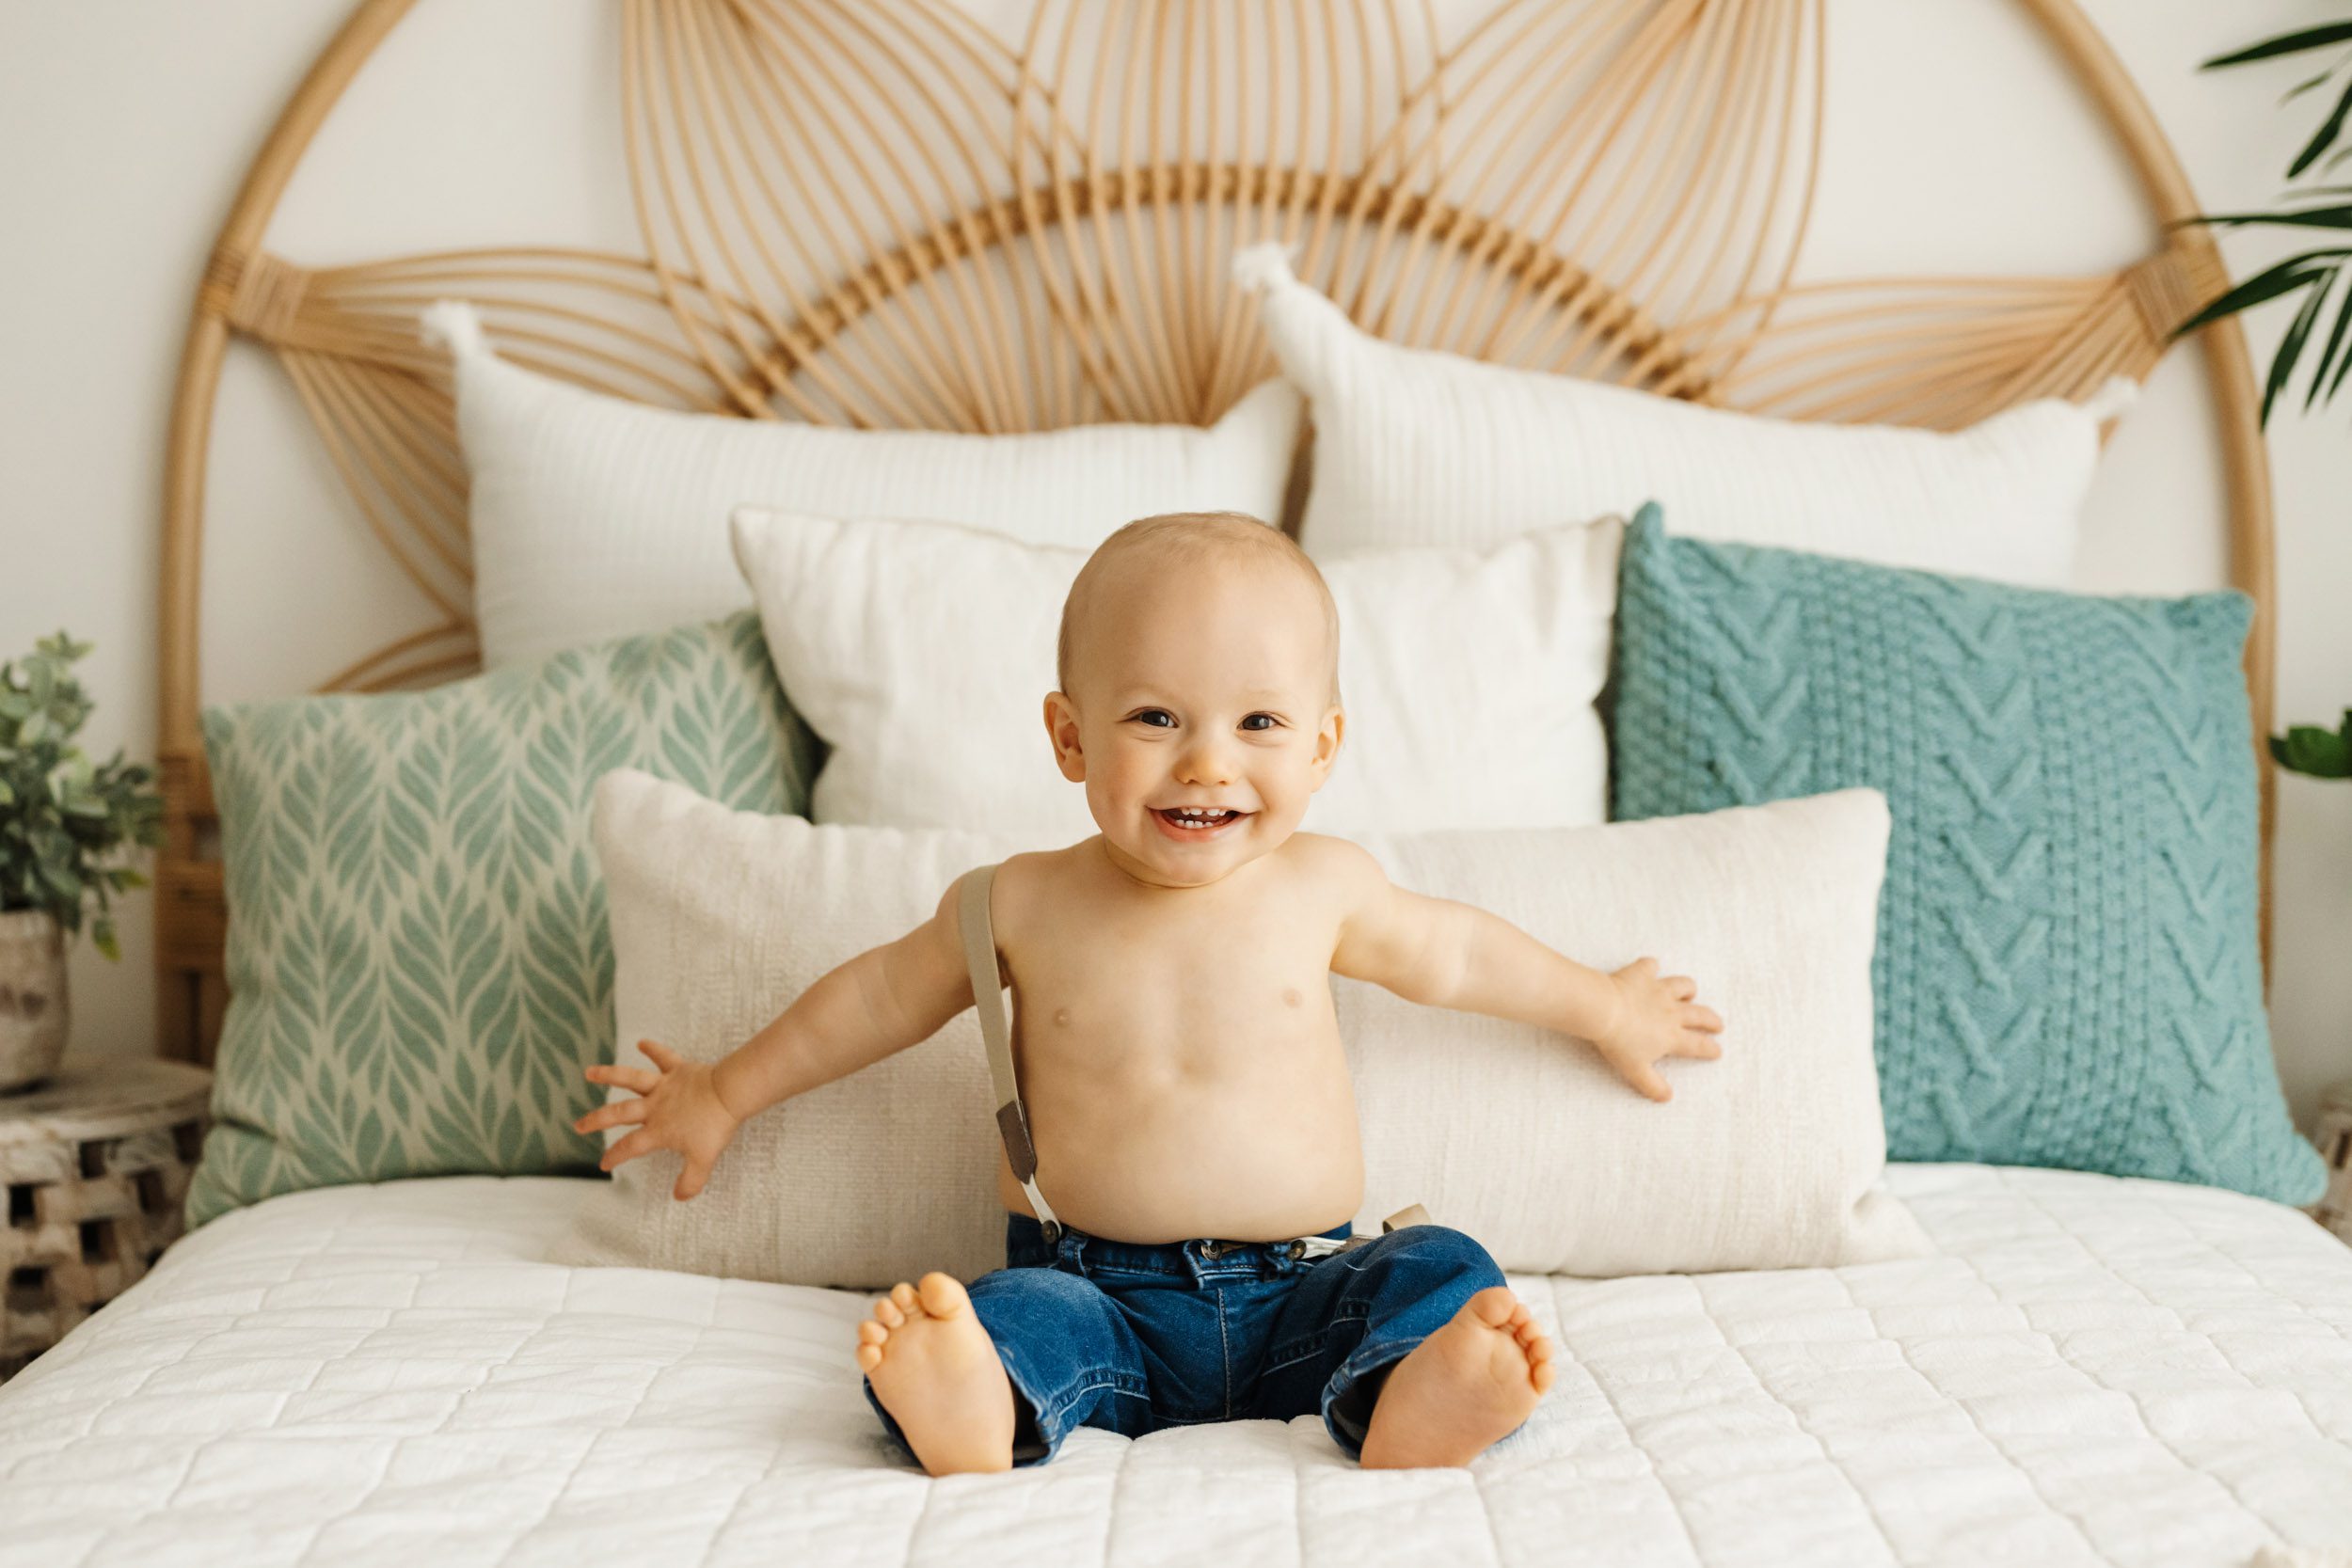 a young boy wearing blue jeans and suspenders sitting on a bed and holding his arms out wide as he smiles directly at the camera during a baby's 1st year photoshoot